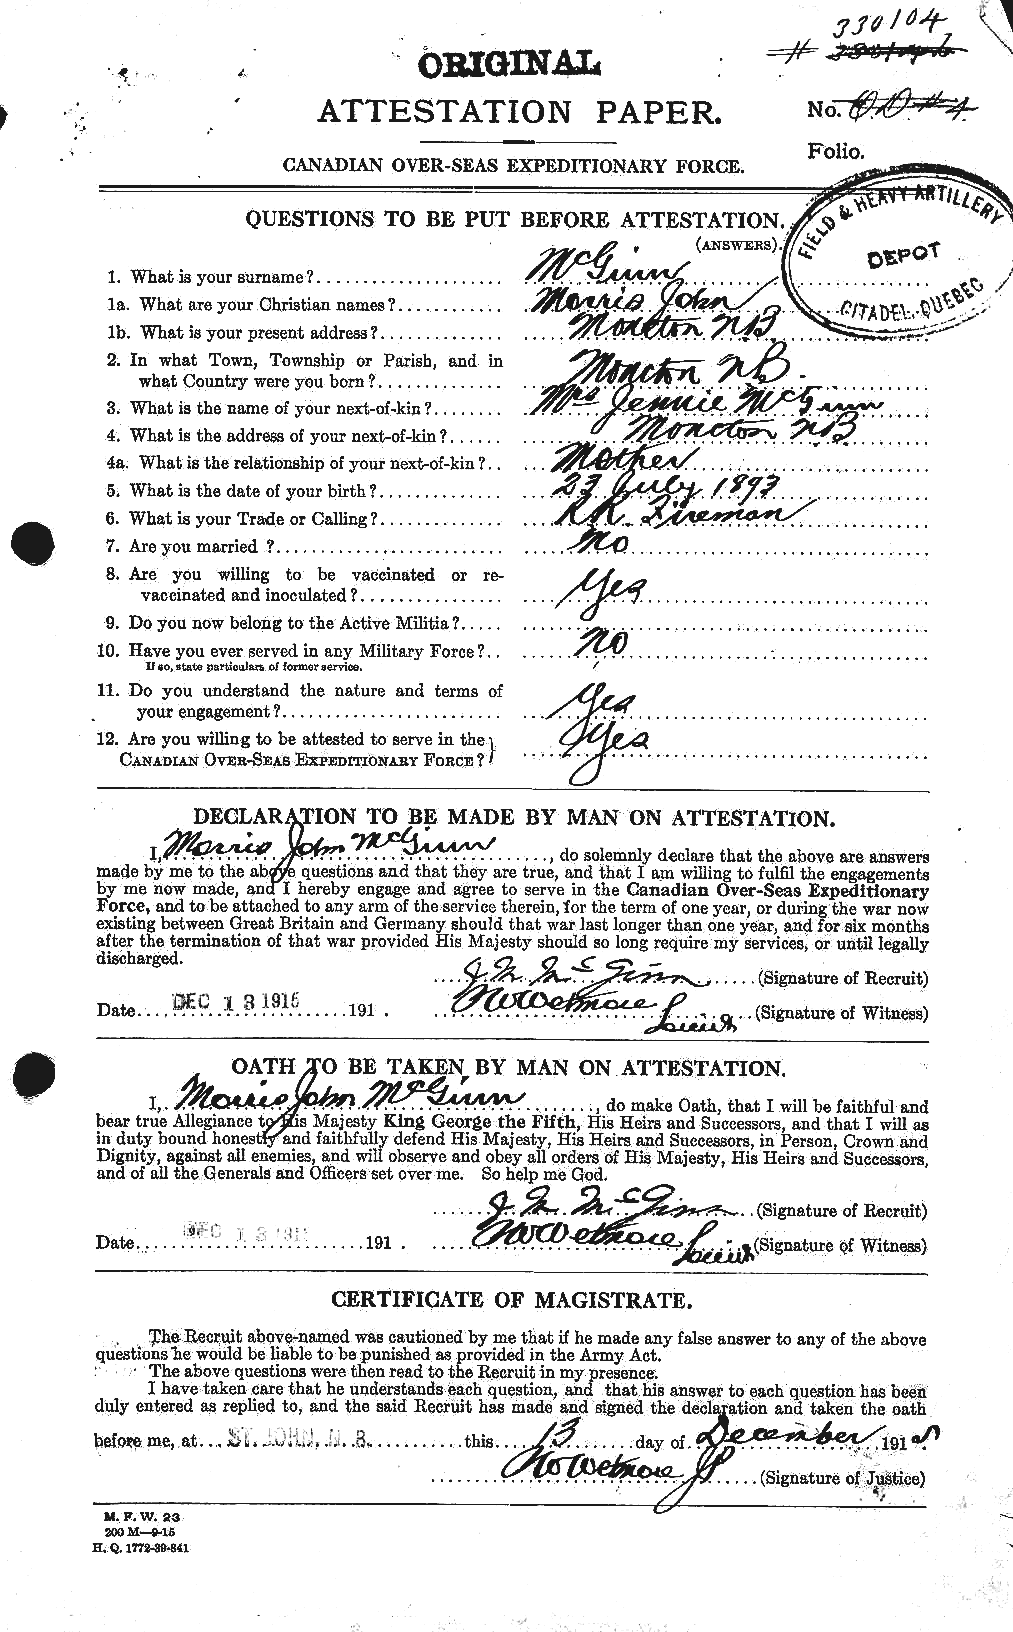 Personnel Records of the First World War - CEF 526345a